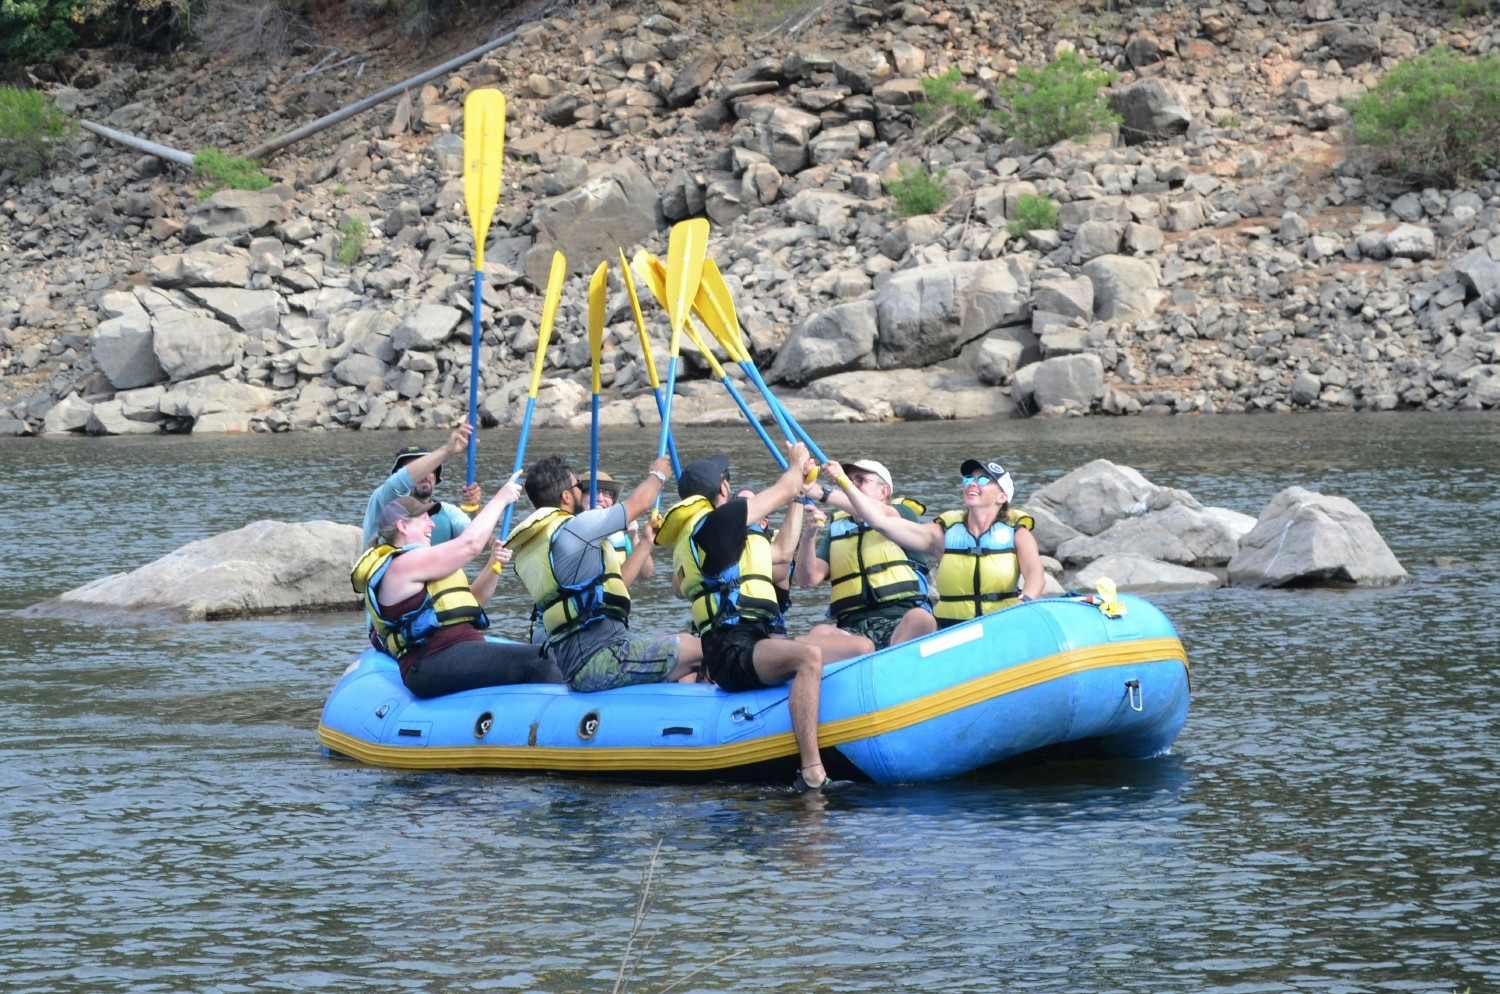 Raising our paddles to another fun group water rafting adventure.